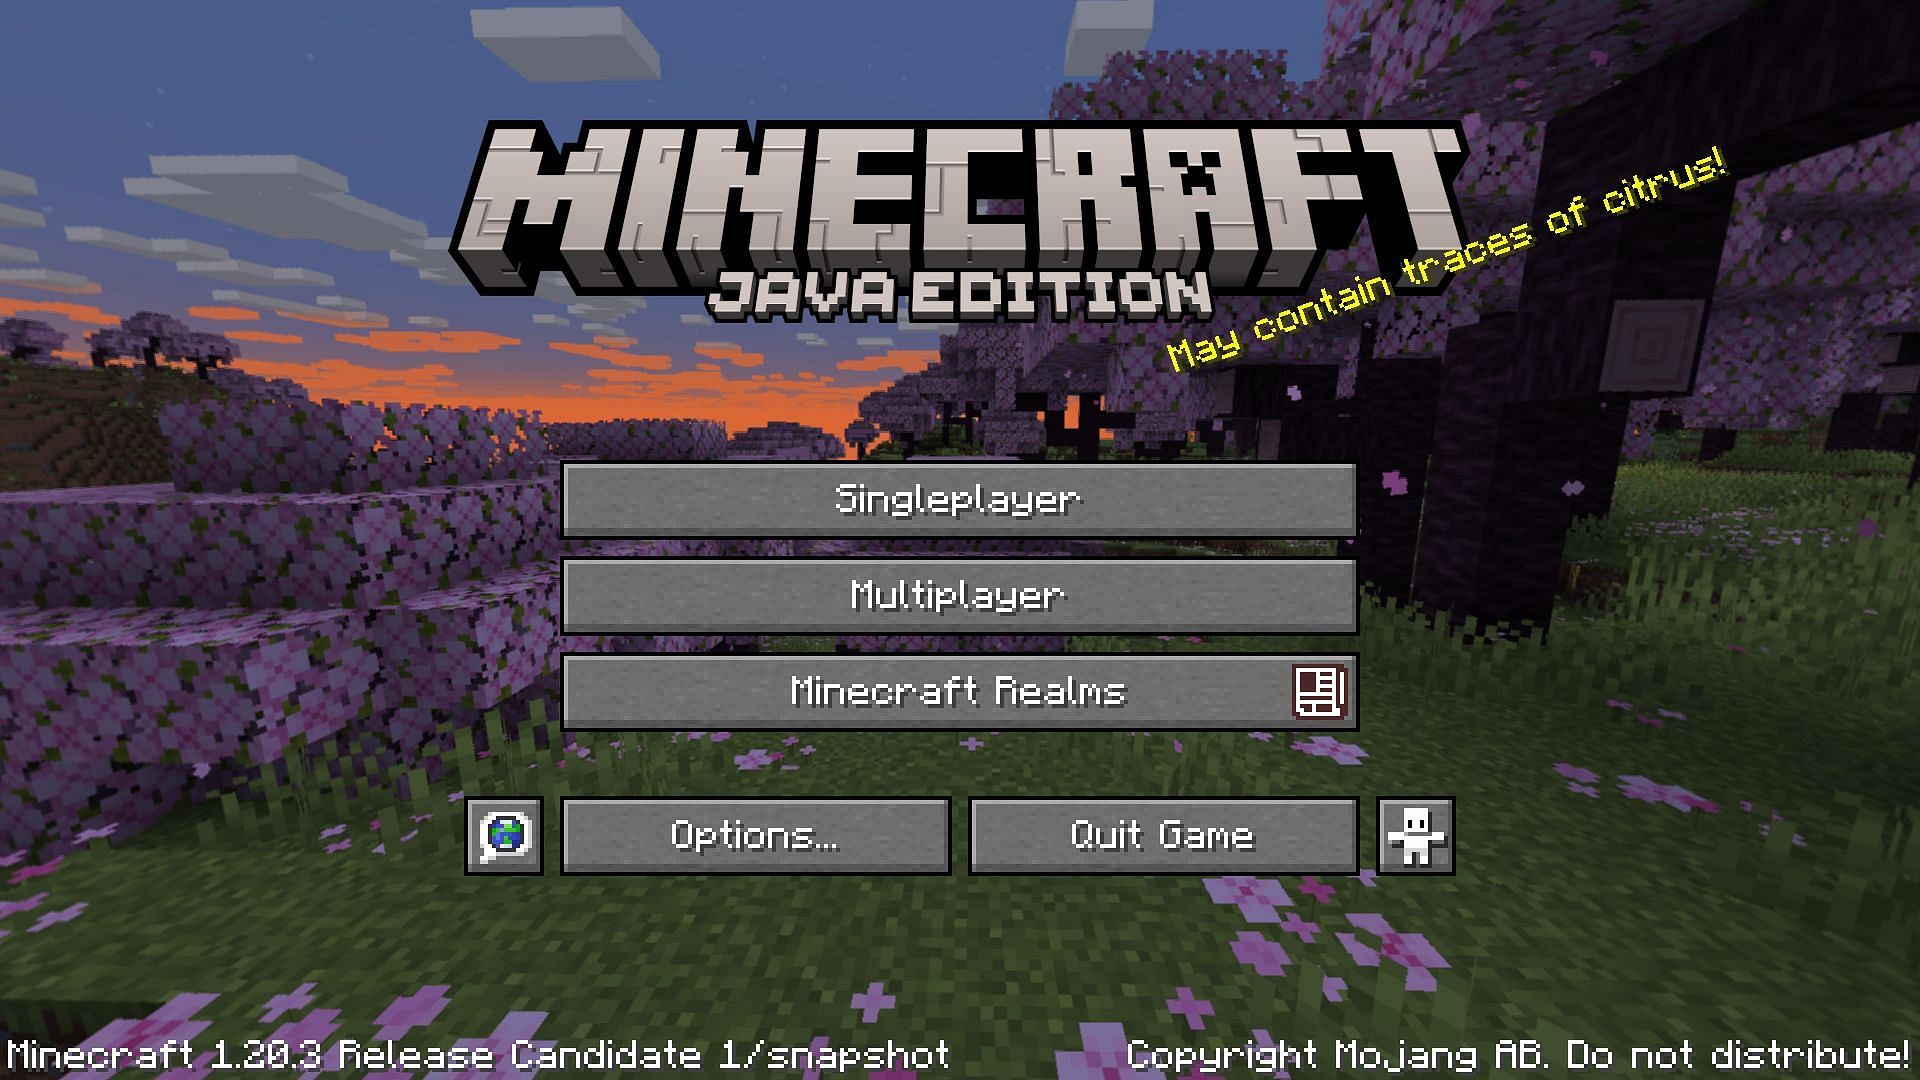 The main menu for Minecraft 1.20.3 Release Candidate 1 (Image via Mojang)